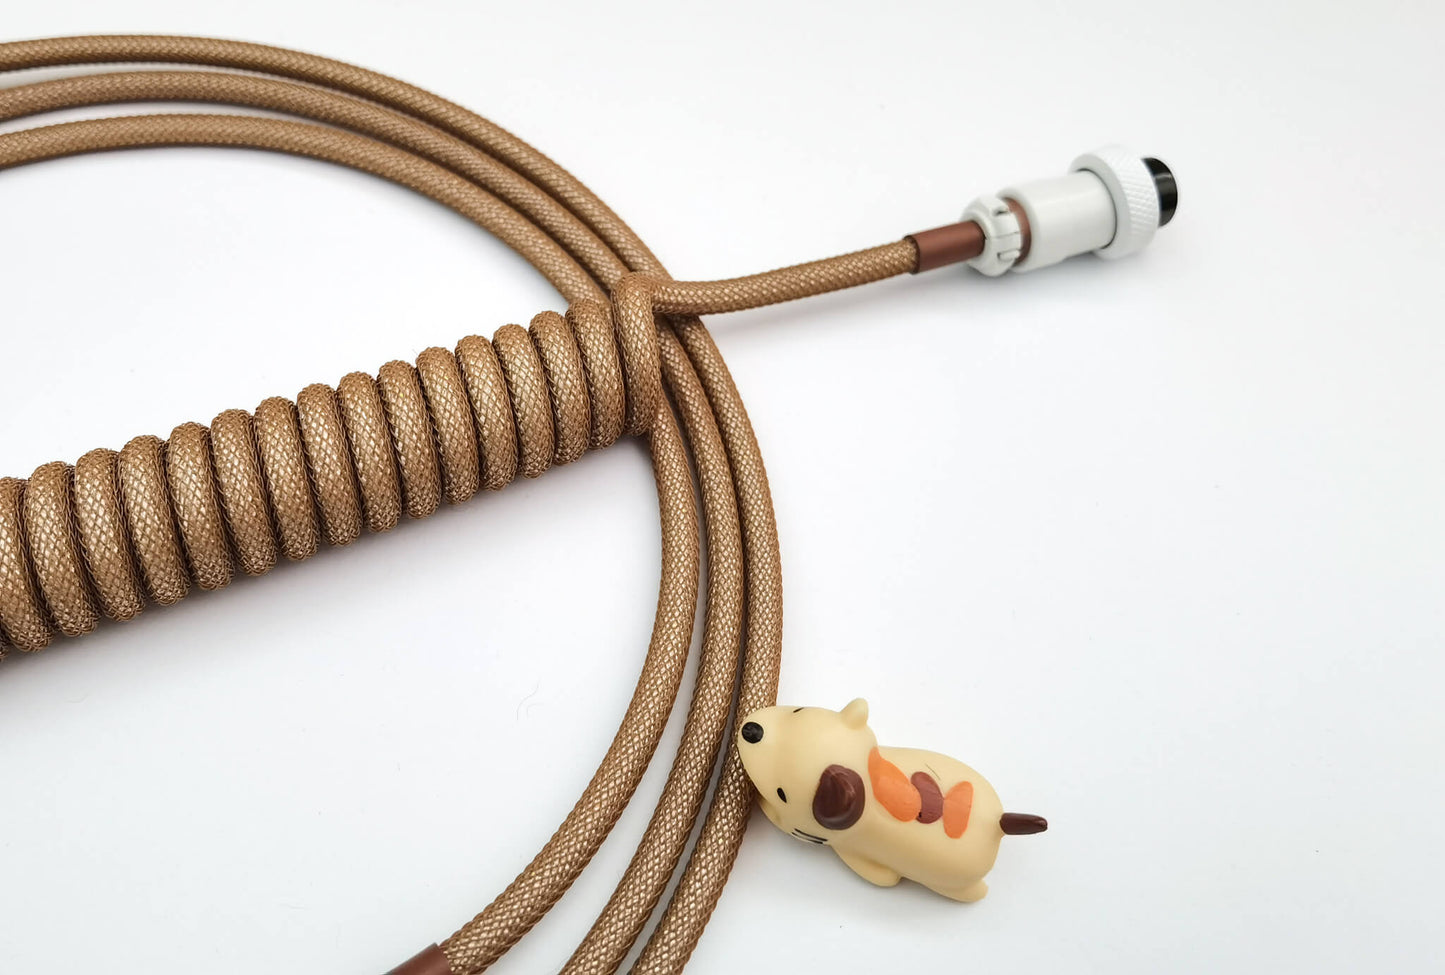 Brown coiled keyboard cable